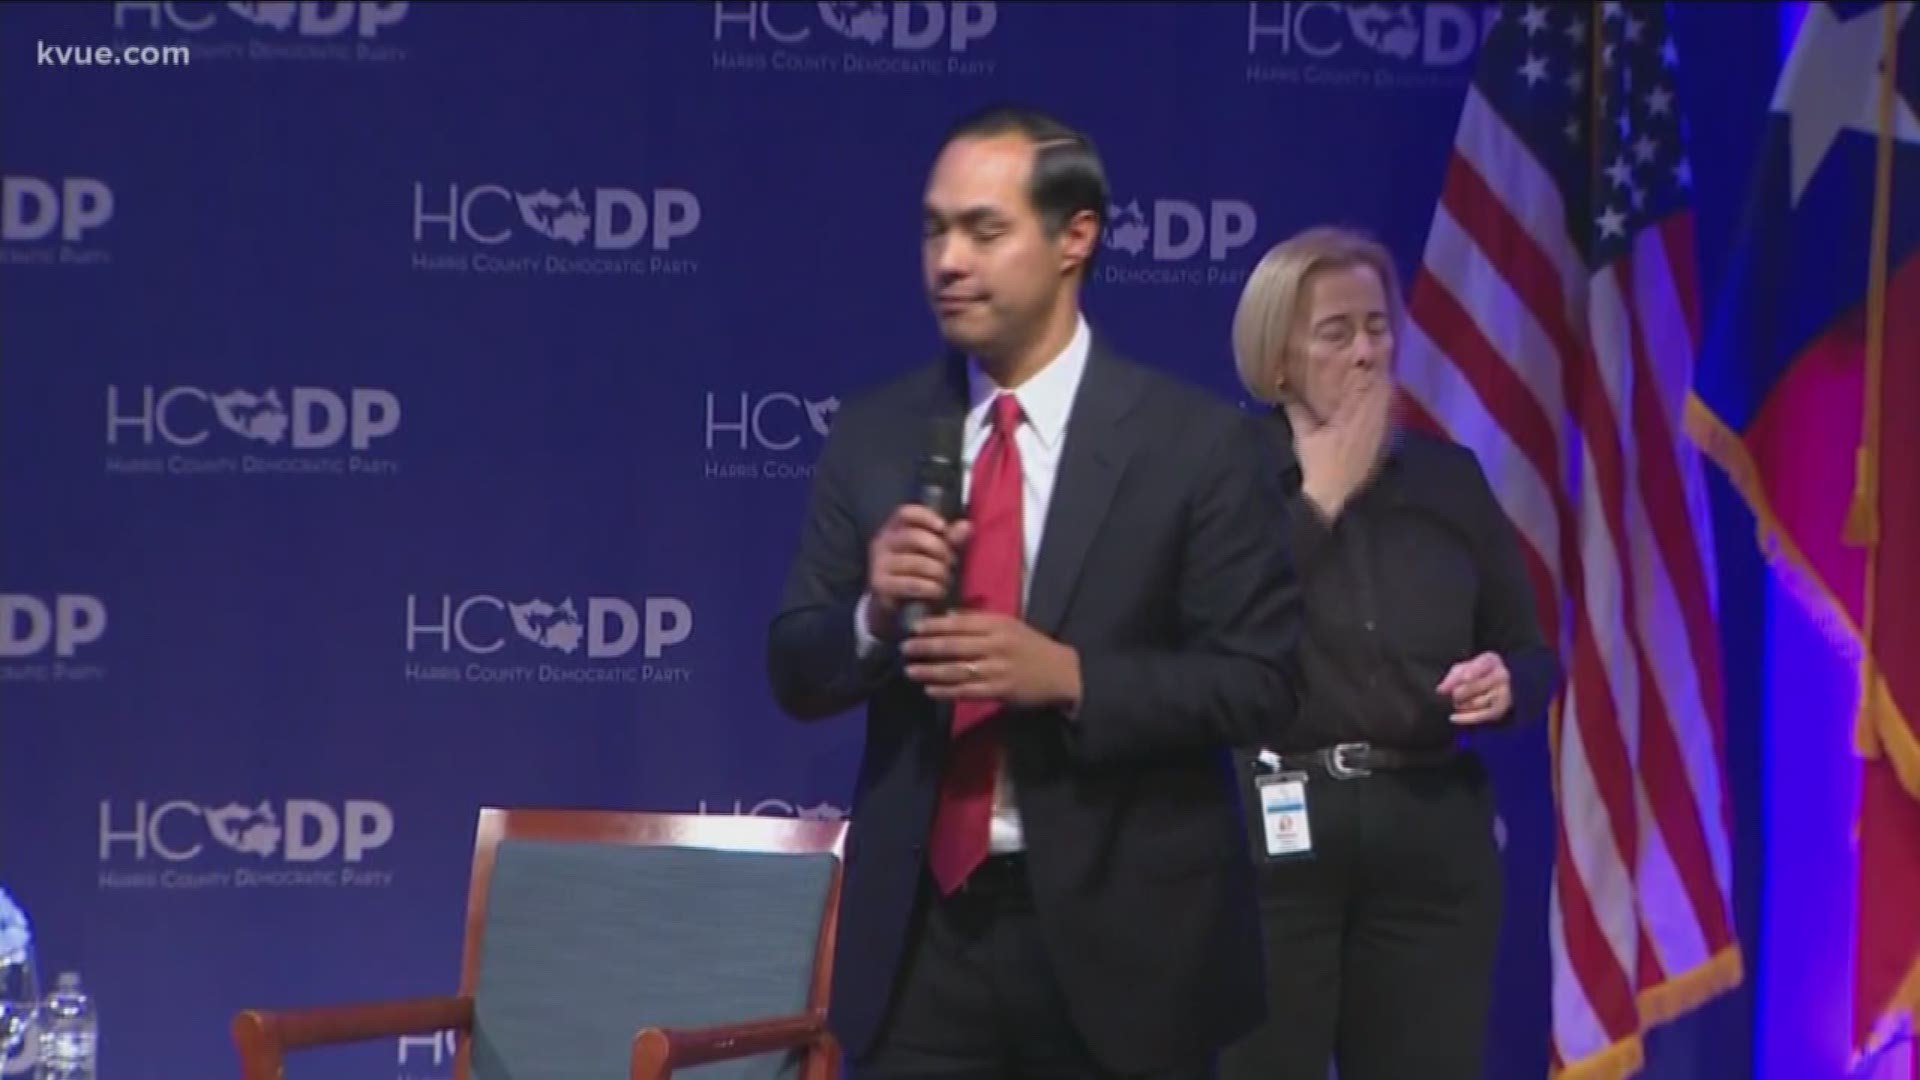 Democratic presidential candidate Julian Castro appears to be gaining steam.